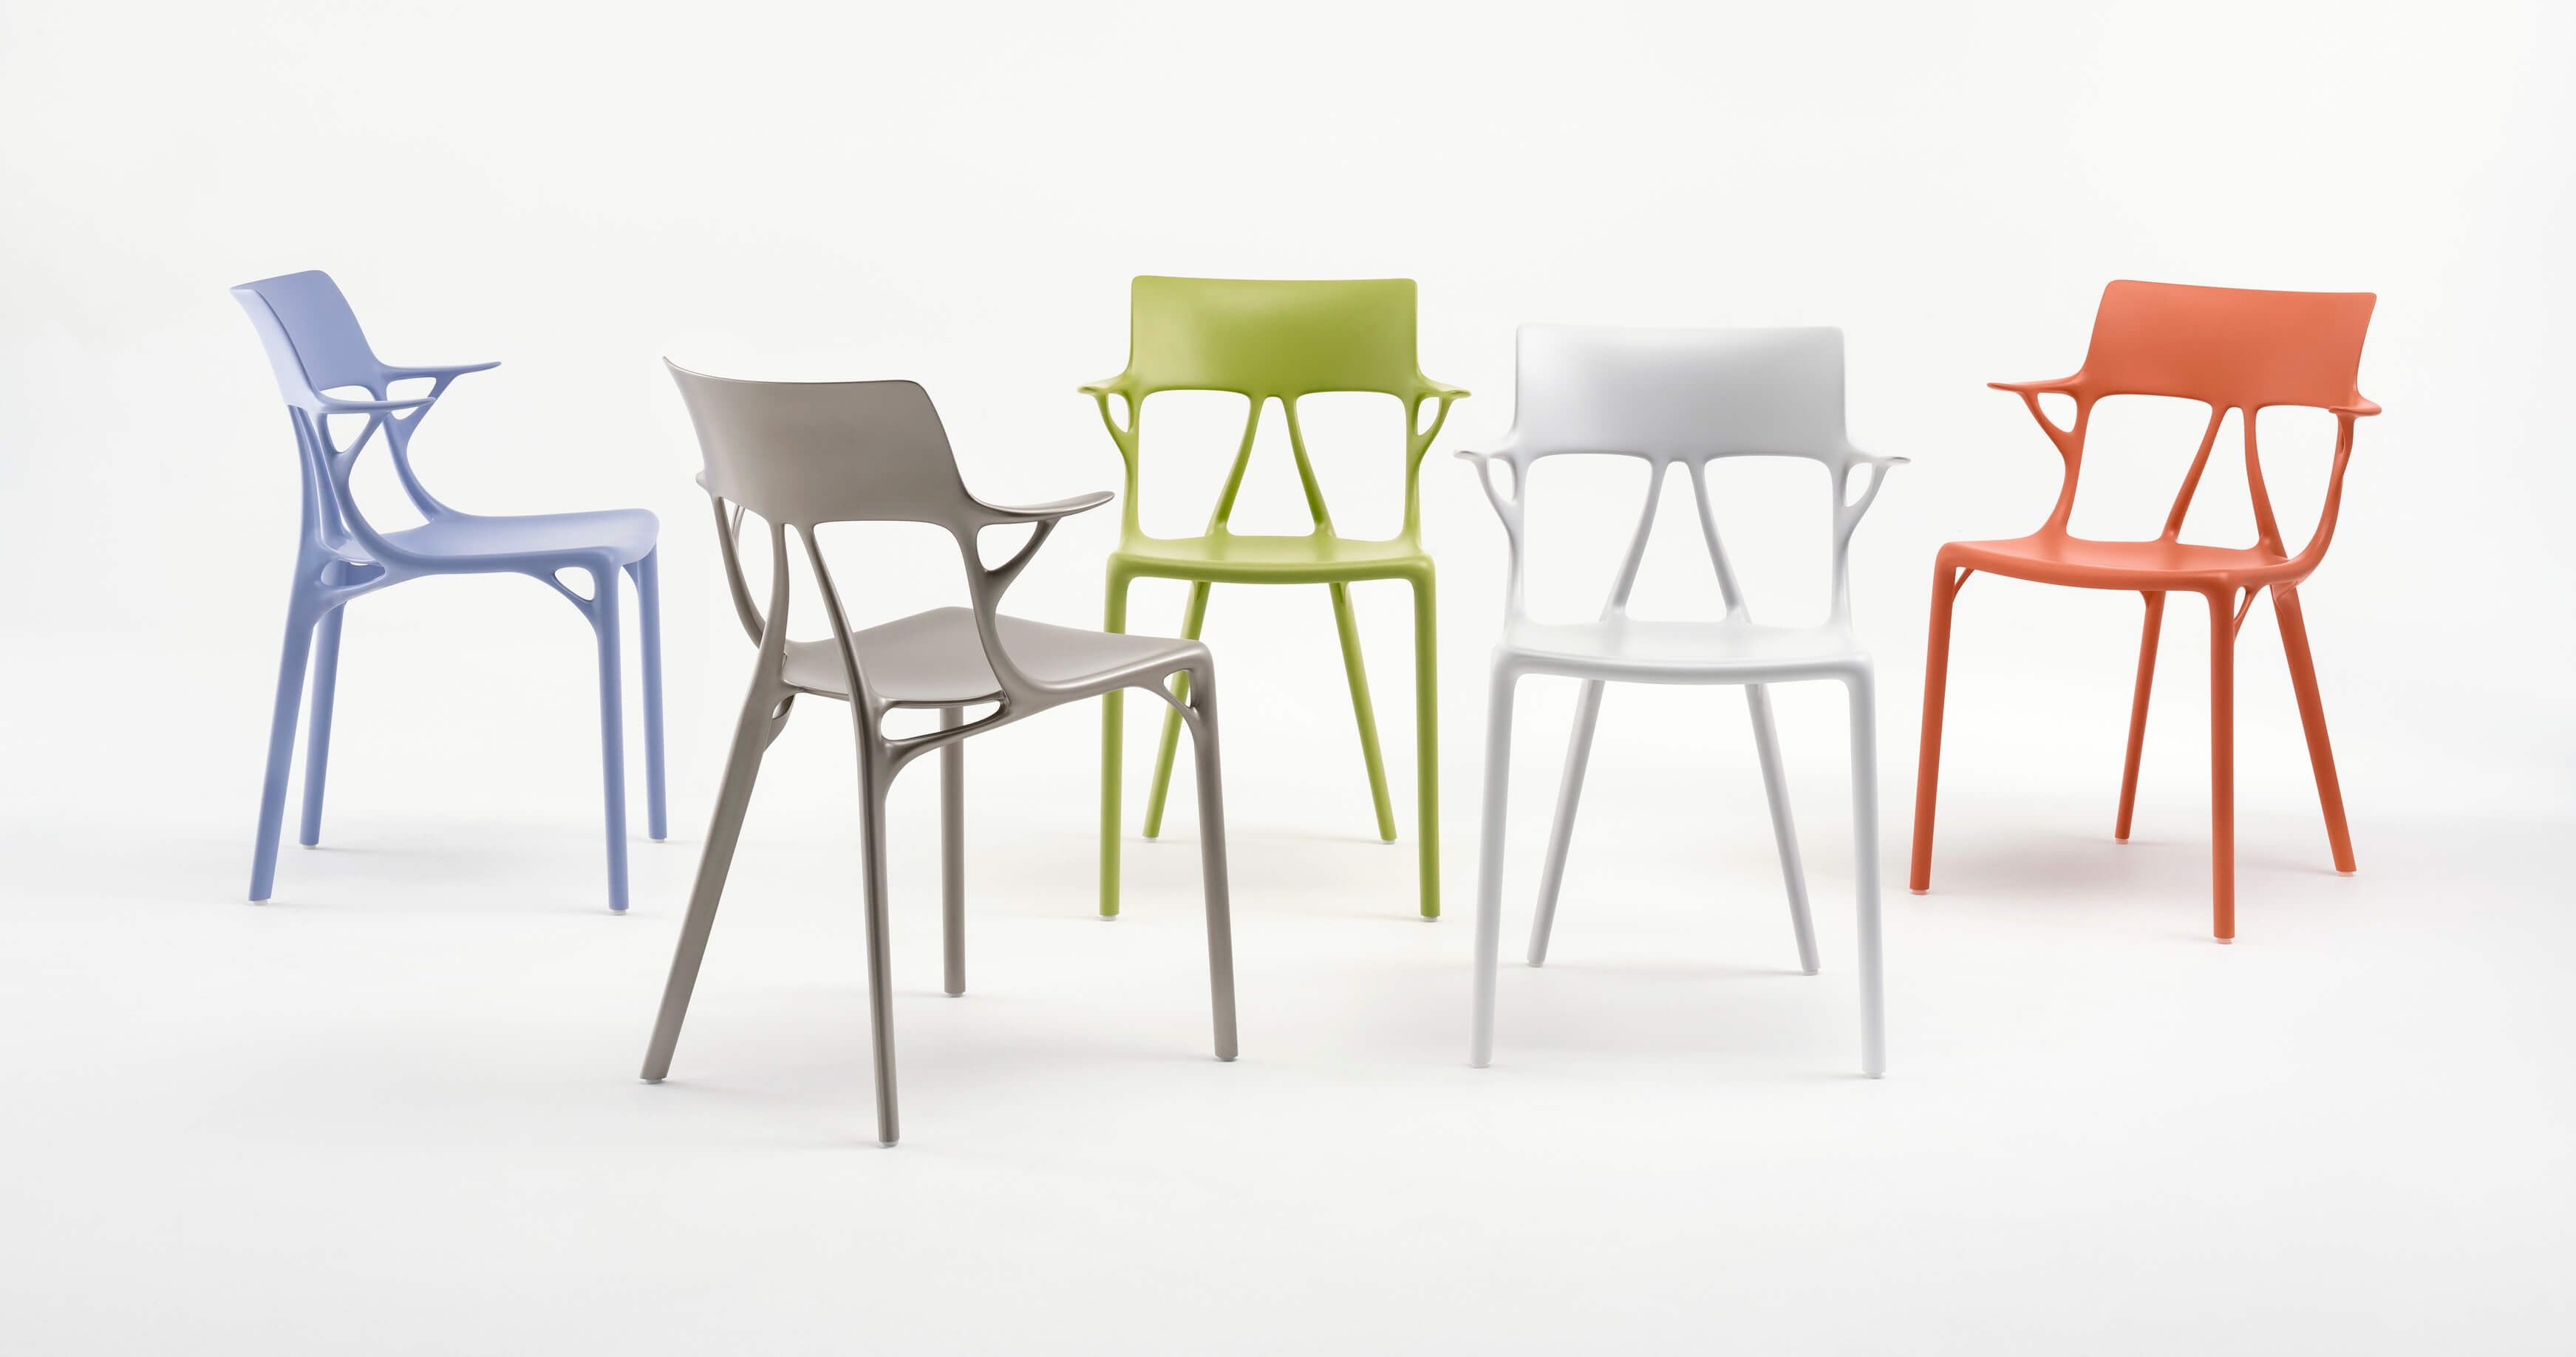 A I BY PHILIPPE STARCK